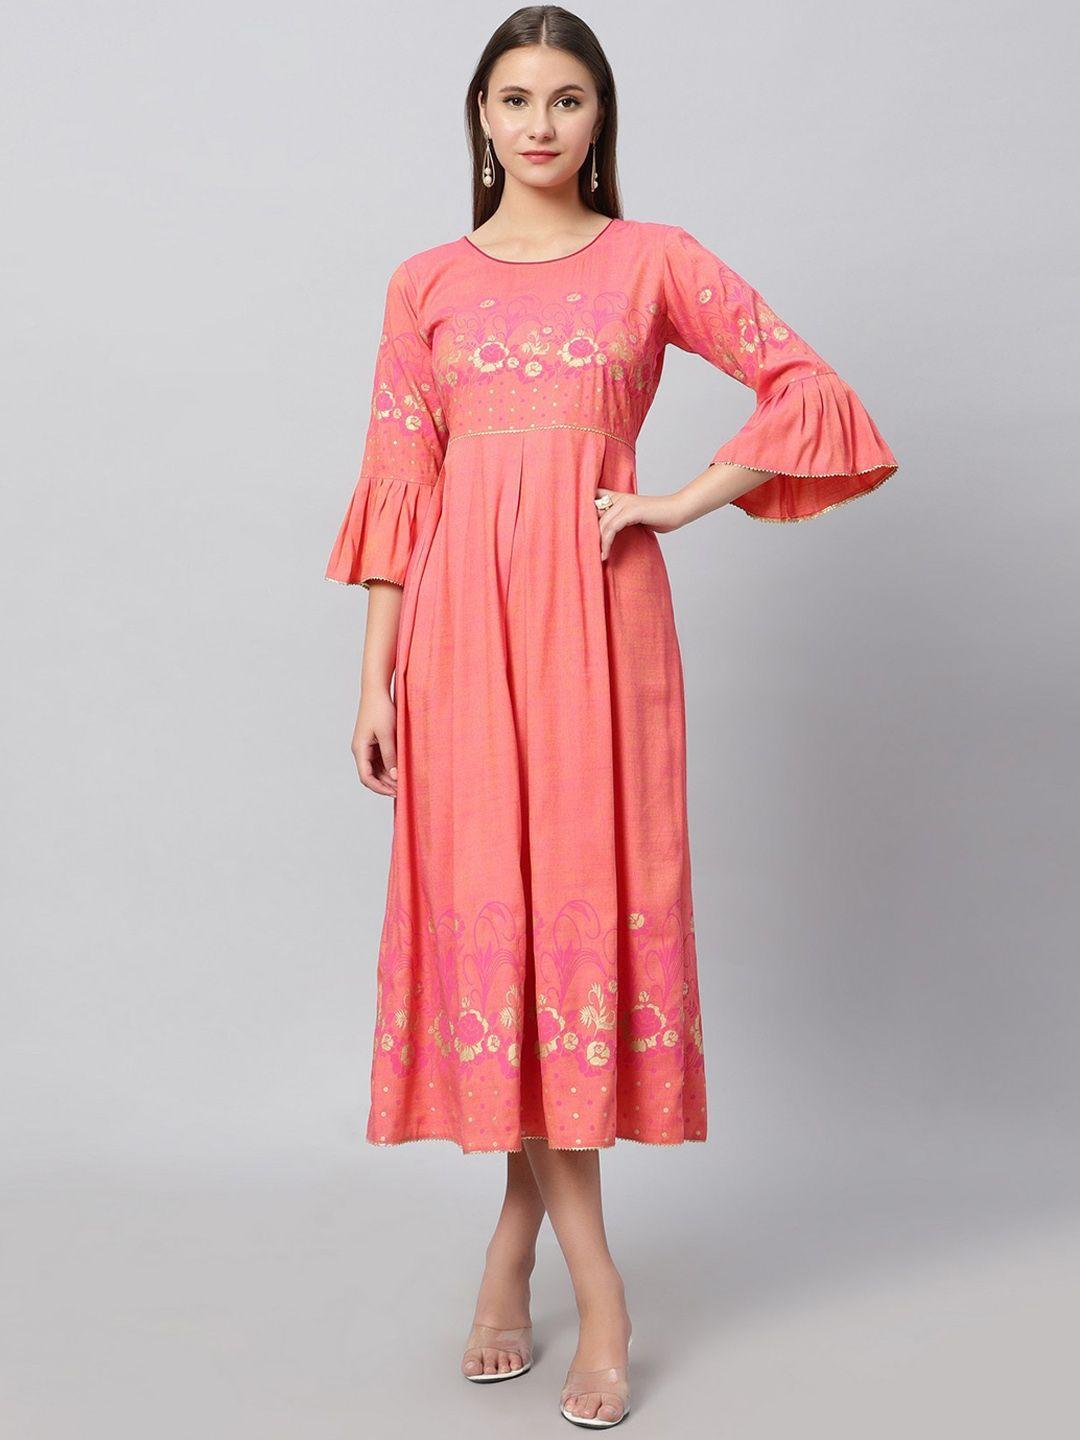 dummy shape floral printed bell sleeves ethnic motifs fit & flare ethnic dress